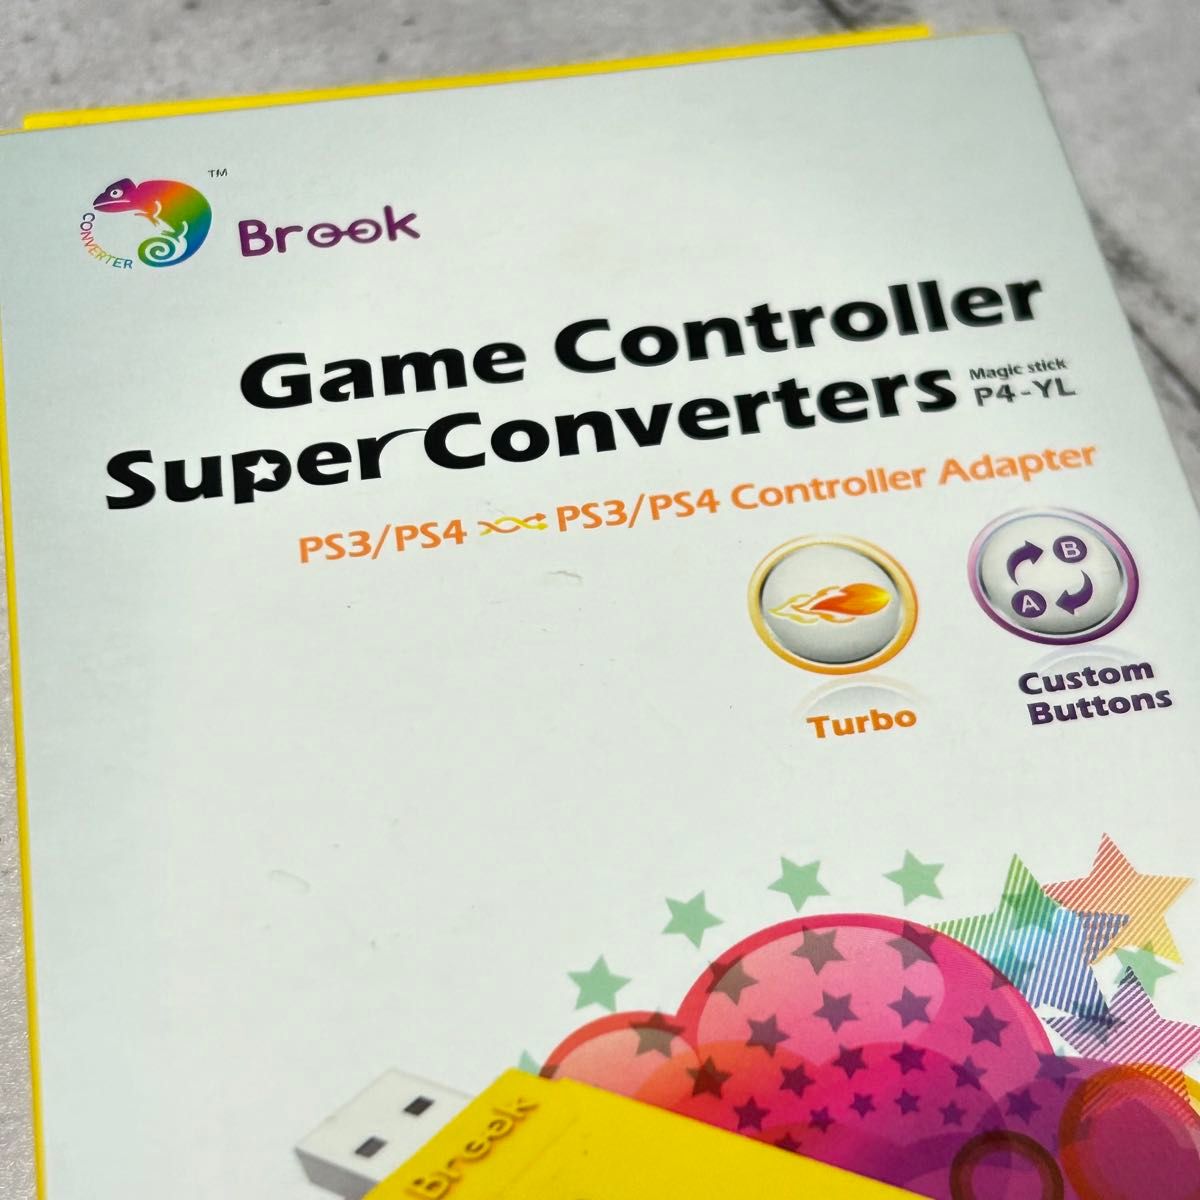 Super Converters P4-YL(PS3/PS4 to PS3/PS4 Controller Adapter)